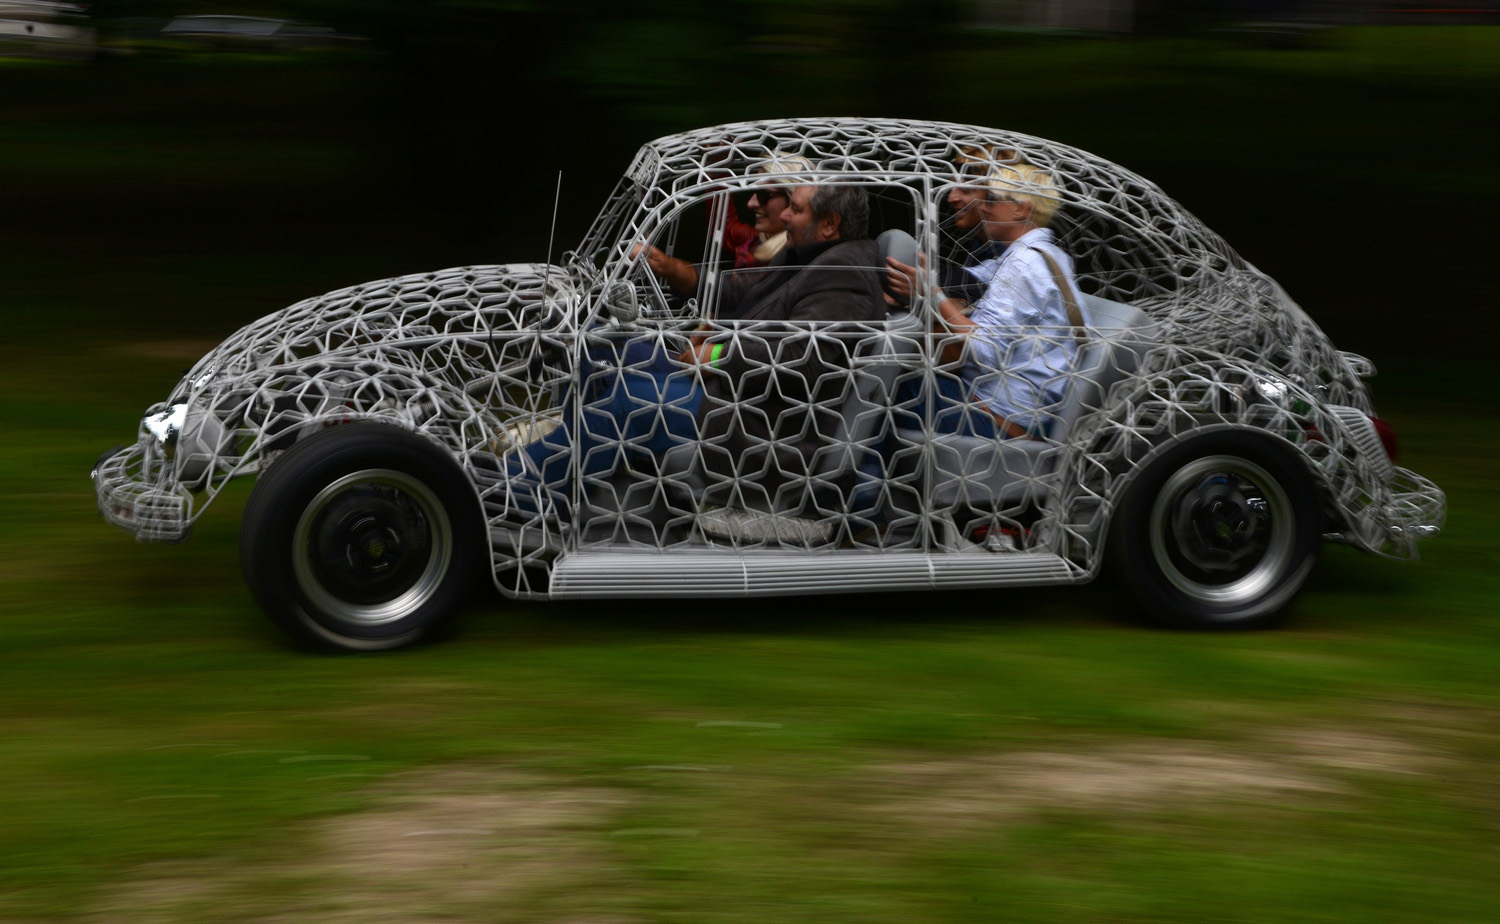 A wire-bodied Orion Volkswagen Beetle is pictured at the "Legendy" Motoring Festival in Prague on June 14, 2014.